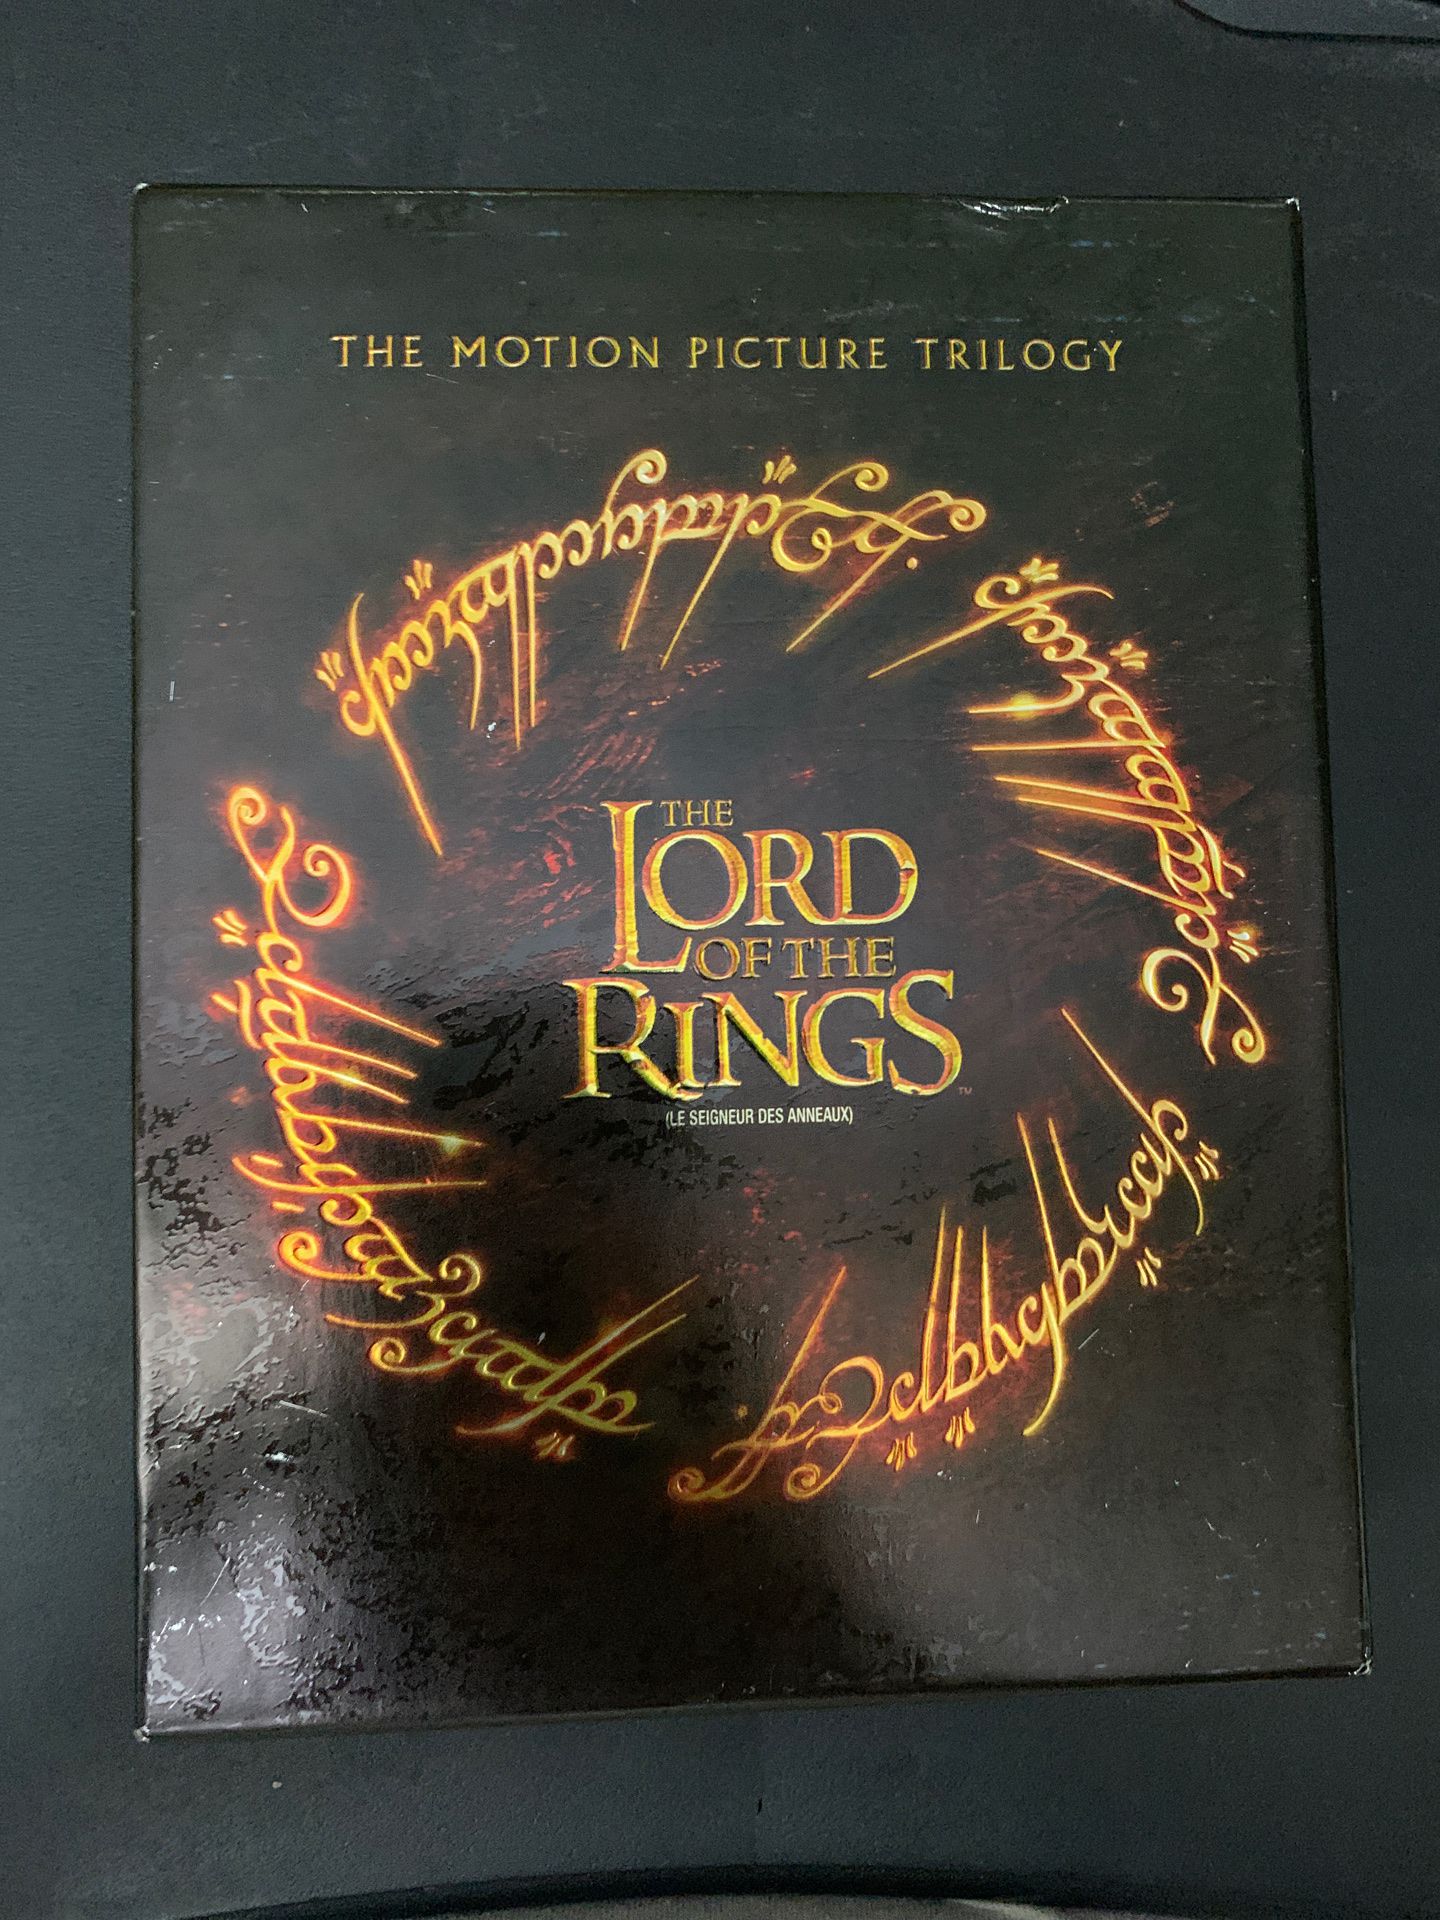 Lord of the Rings Trilogy Blu-Ray + DVD + Digital Edition